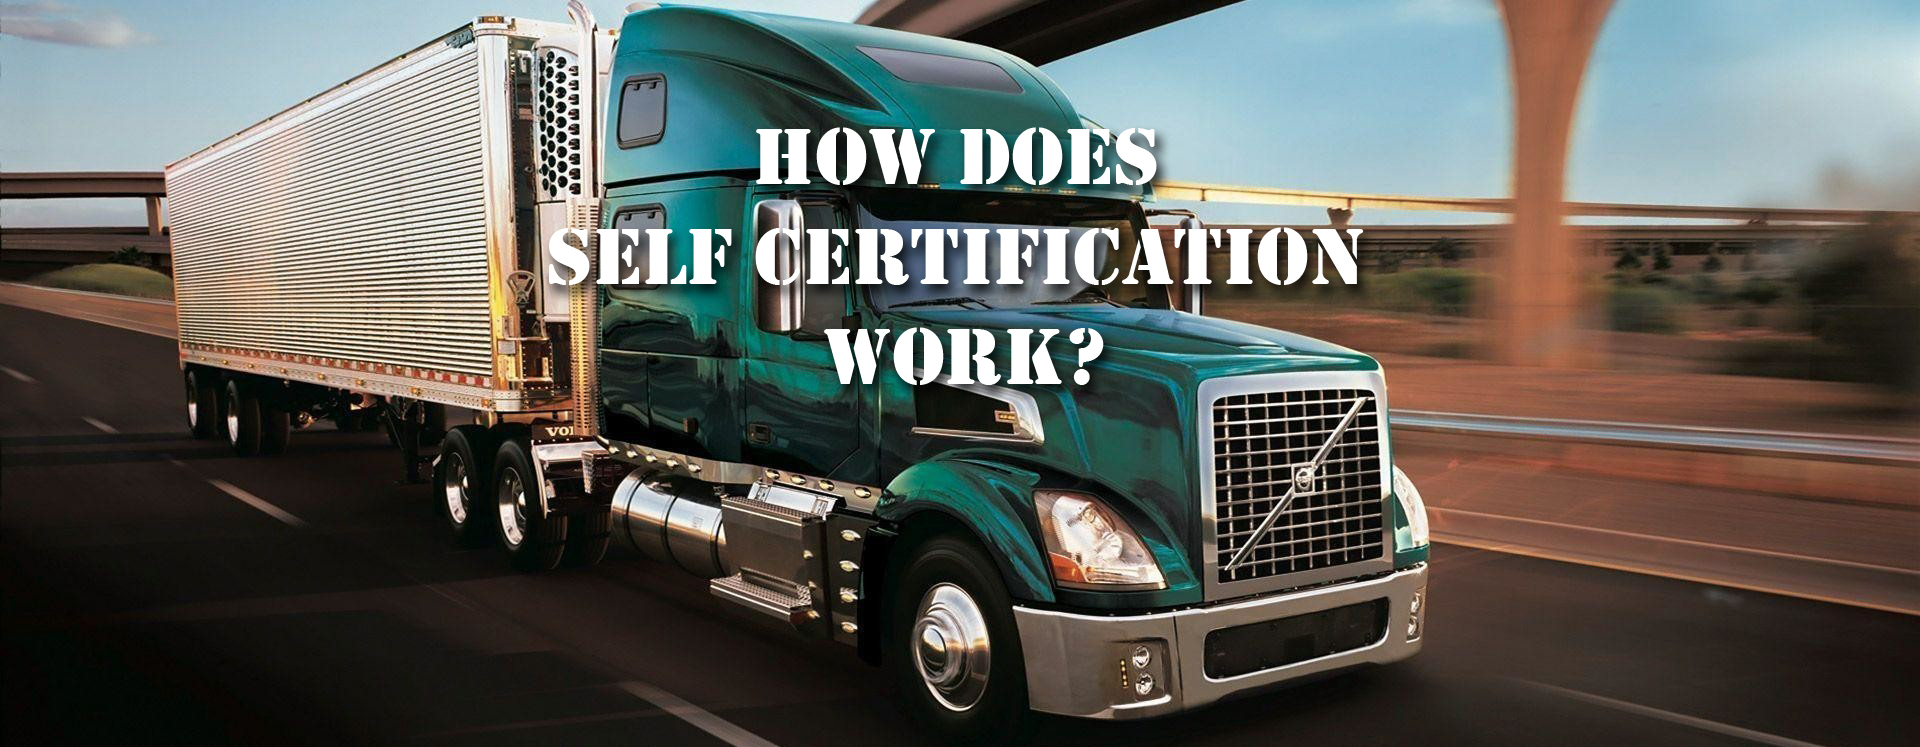 CDL Self Certification in MA New England DOT Physicals Inc